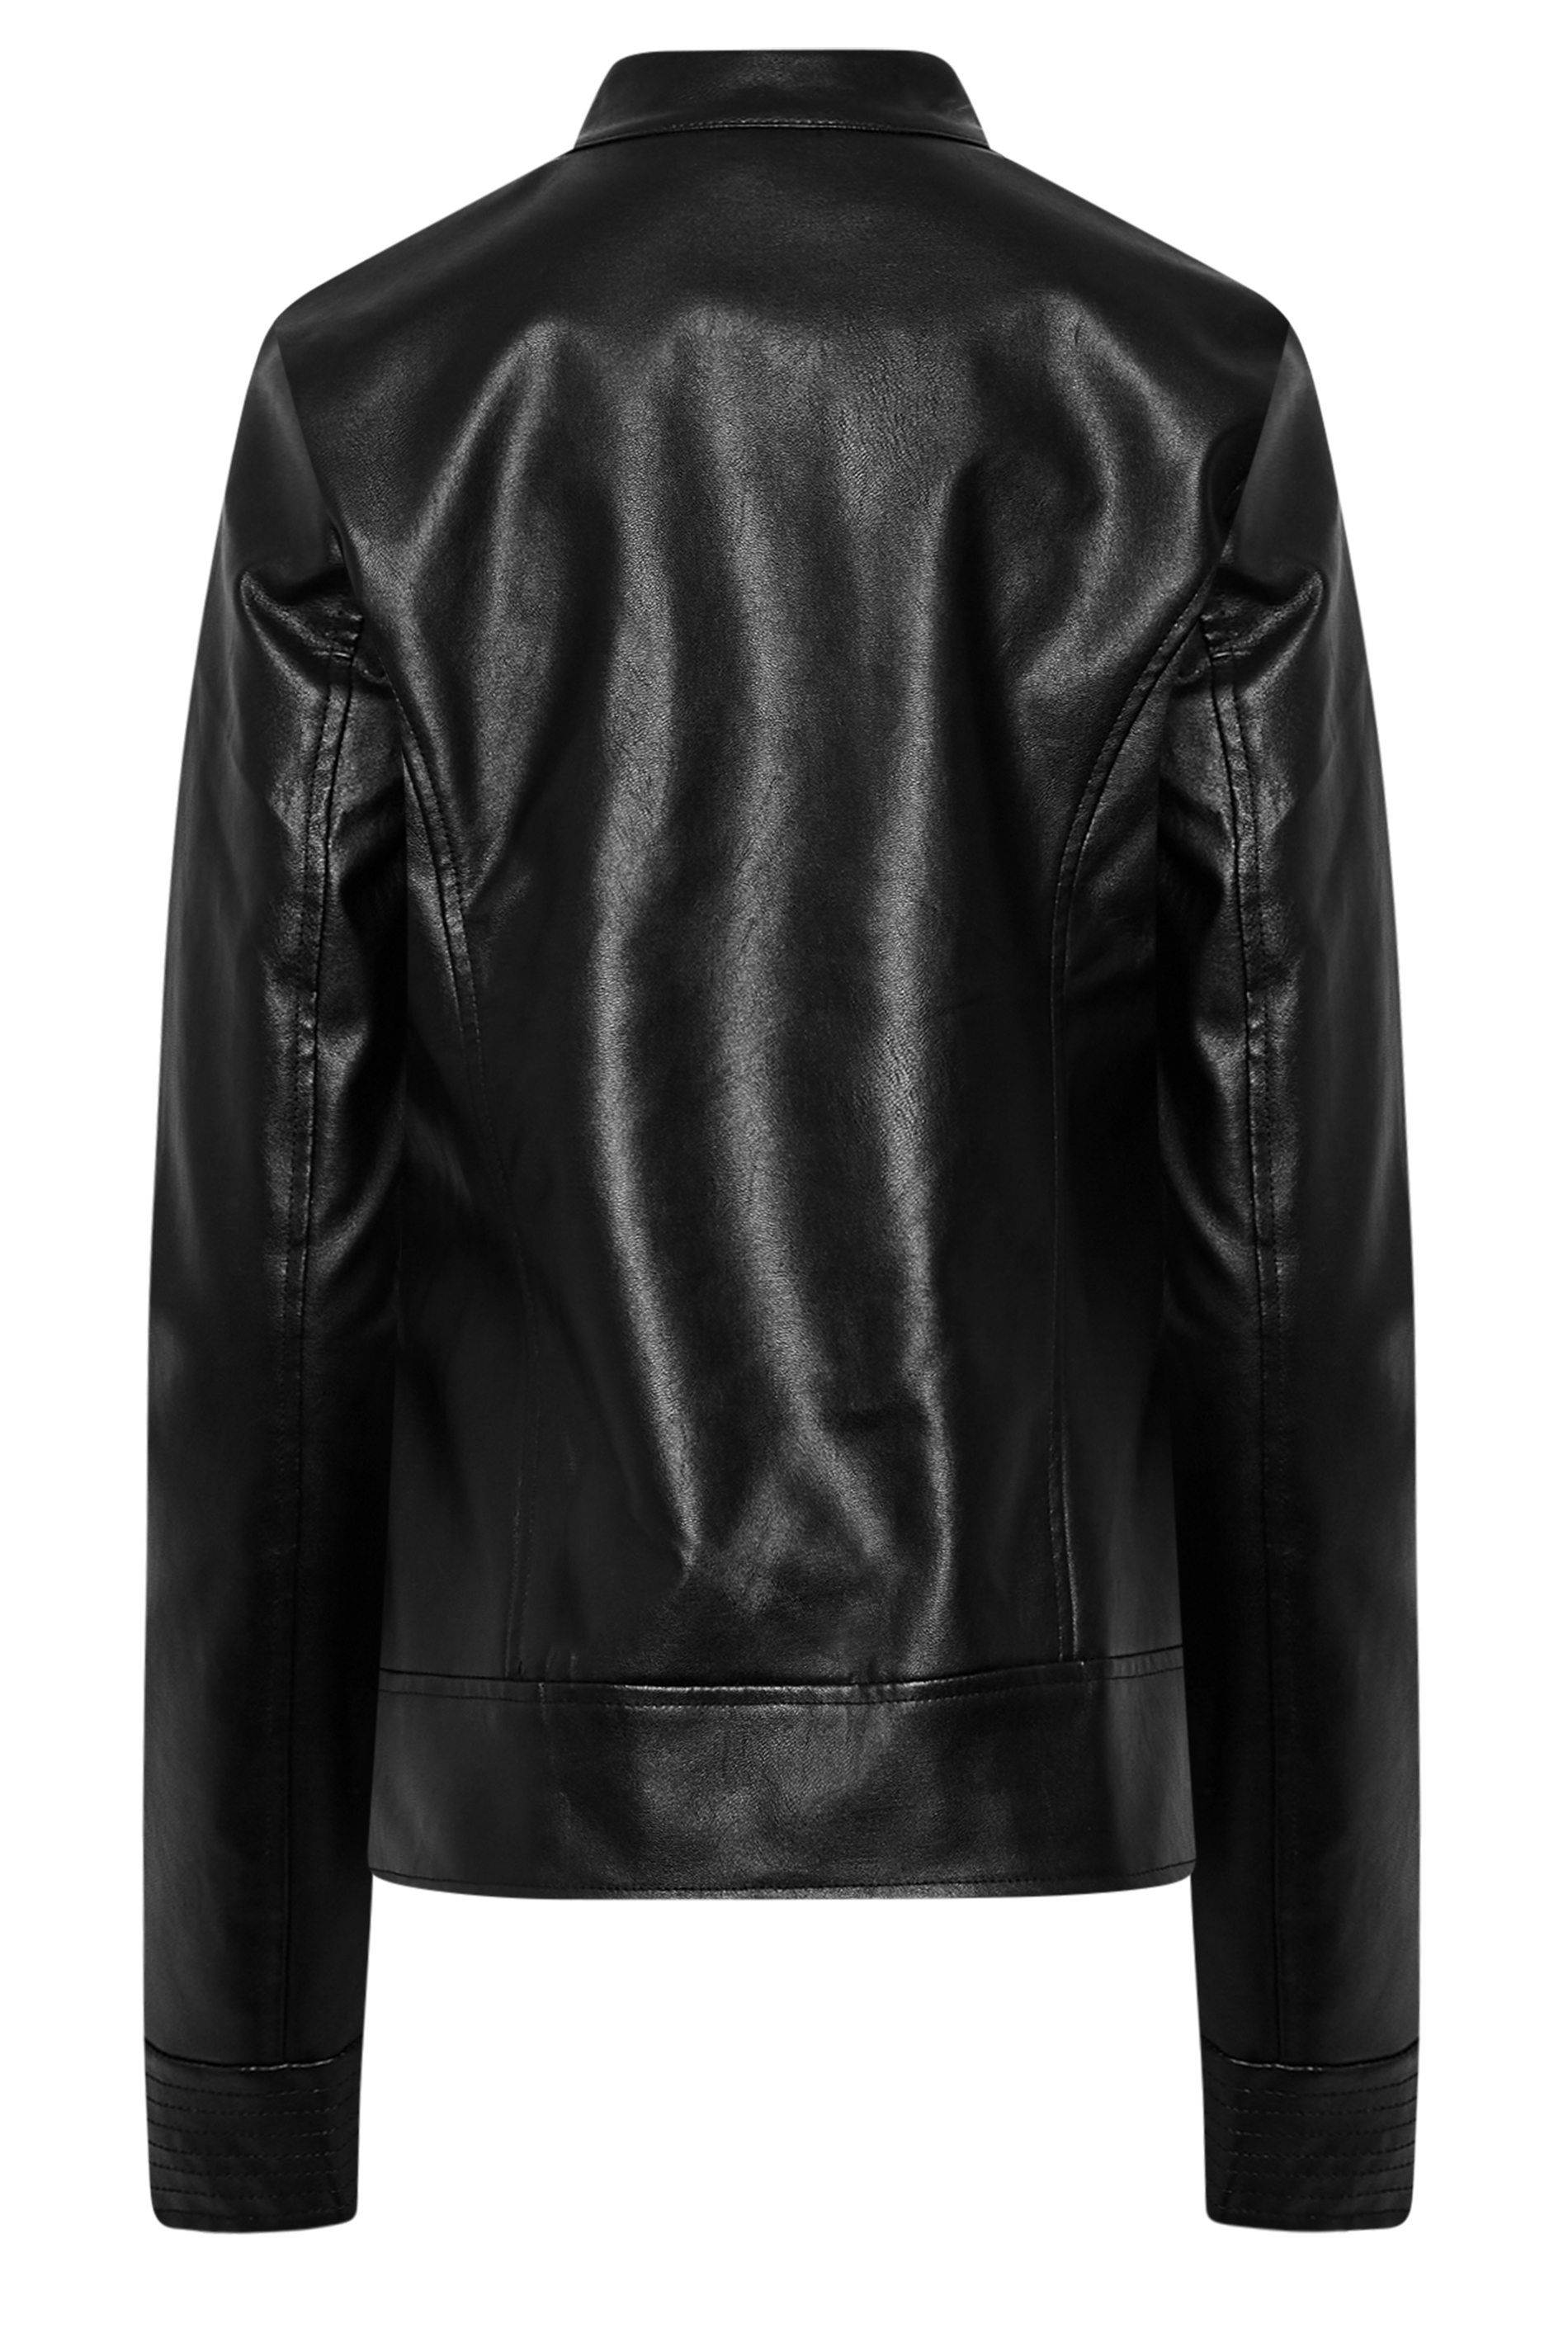 LTS Tall Black Women's Collarless Faux Leather Jacket | Long Tall Sally